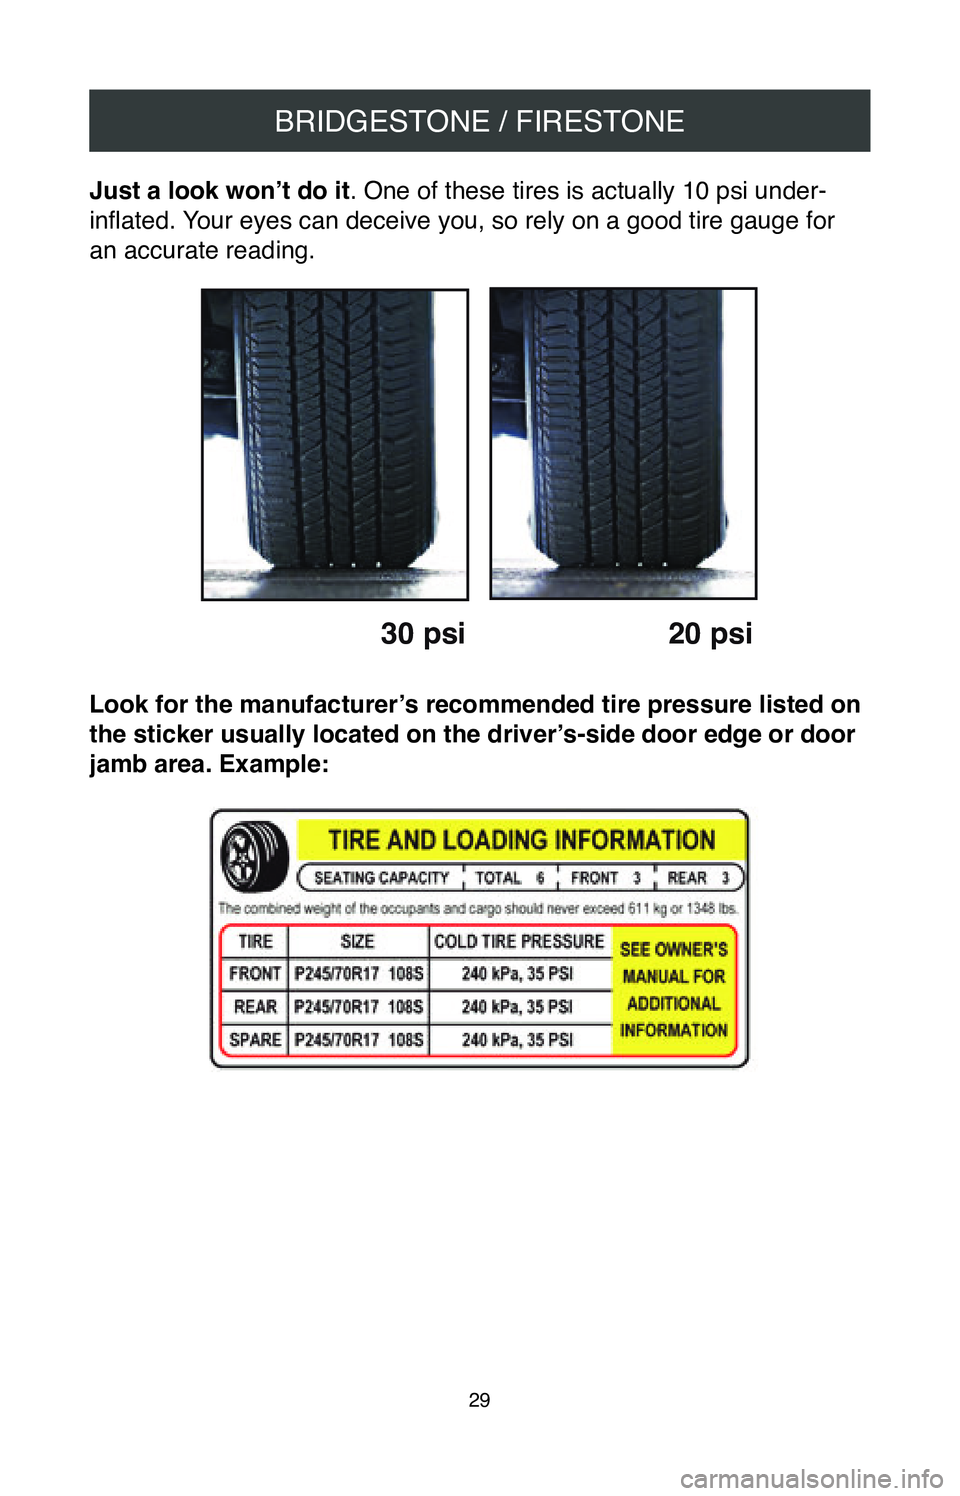 TOYOTA MIRAI 2020  Warranties & Maintenance Guides (in English) BRIDGESTONE / FIRESTONE
29
Just a look won’t do it. One of these tires is actually 10 psi under-
inflated. Your eyes can deceive you, so rely on a good tire gauge for   
an accurate reading.
30 psi 